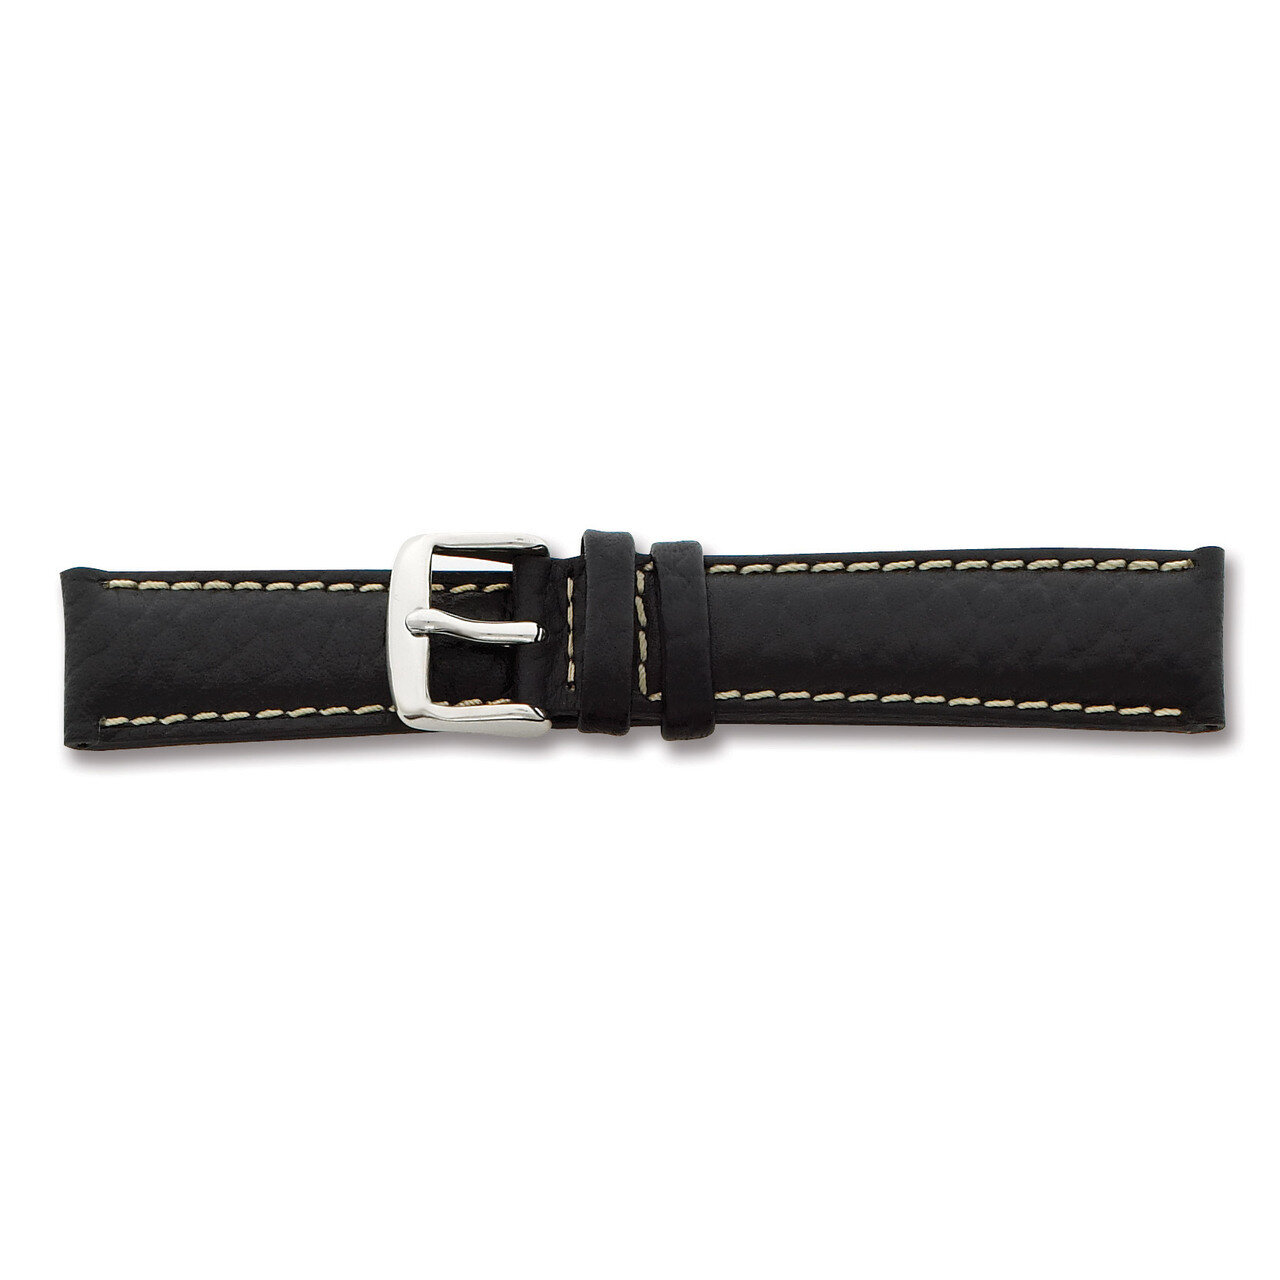 16mm Long Black Leather White Stitch Watch Band 8.5 Inch Silver-tone Buckle BA99L-16